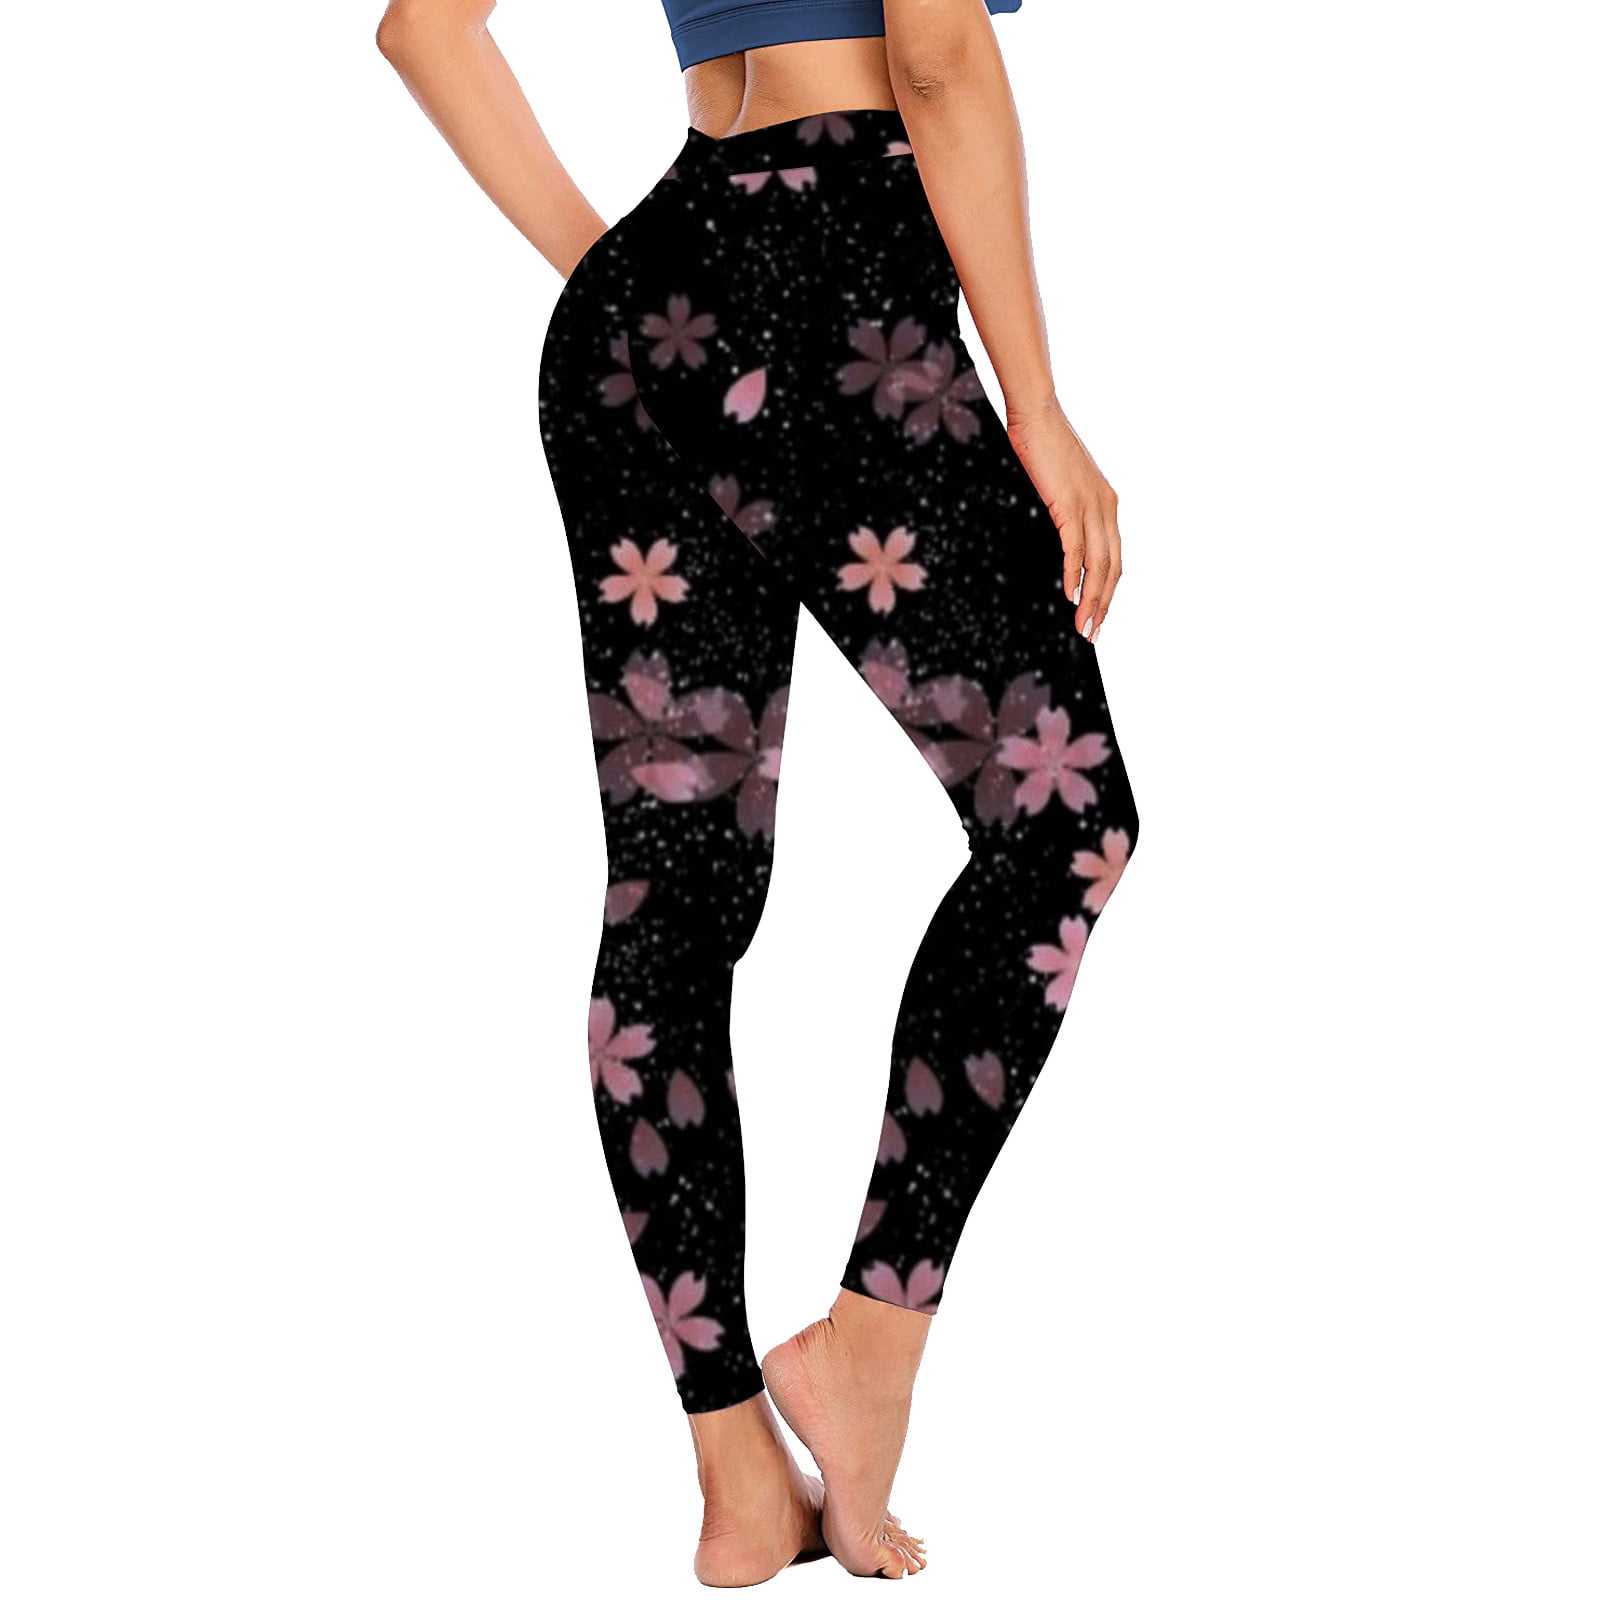 YYDGH High Waist Yoga Pants for Women with Pockets Floral Print